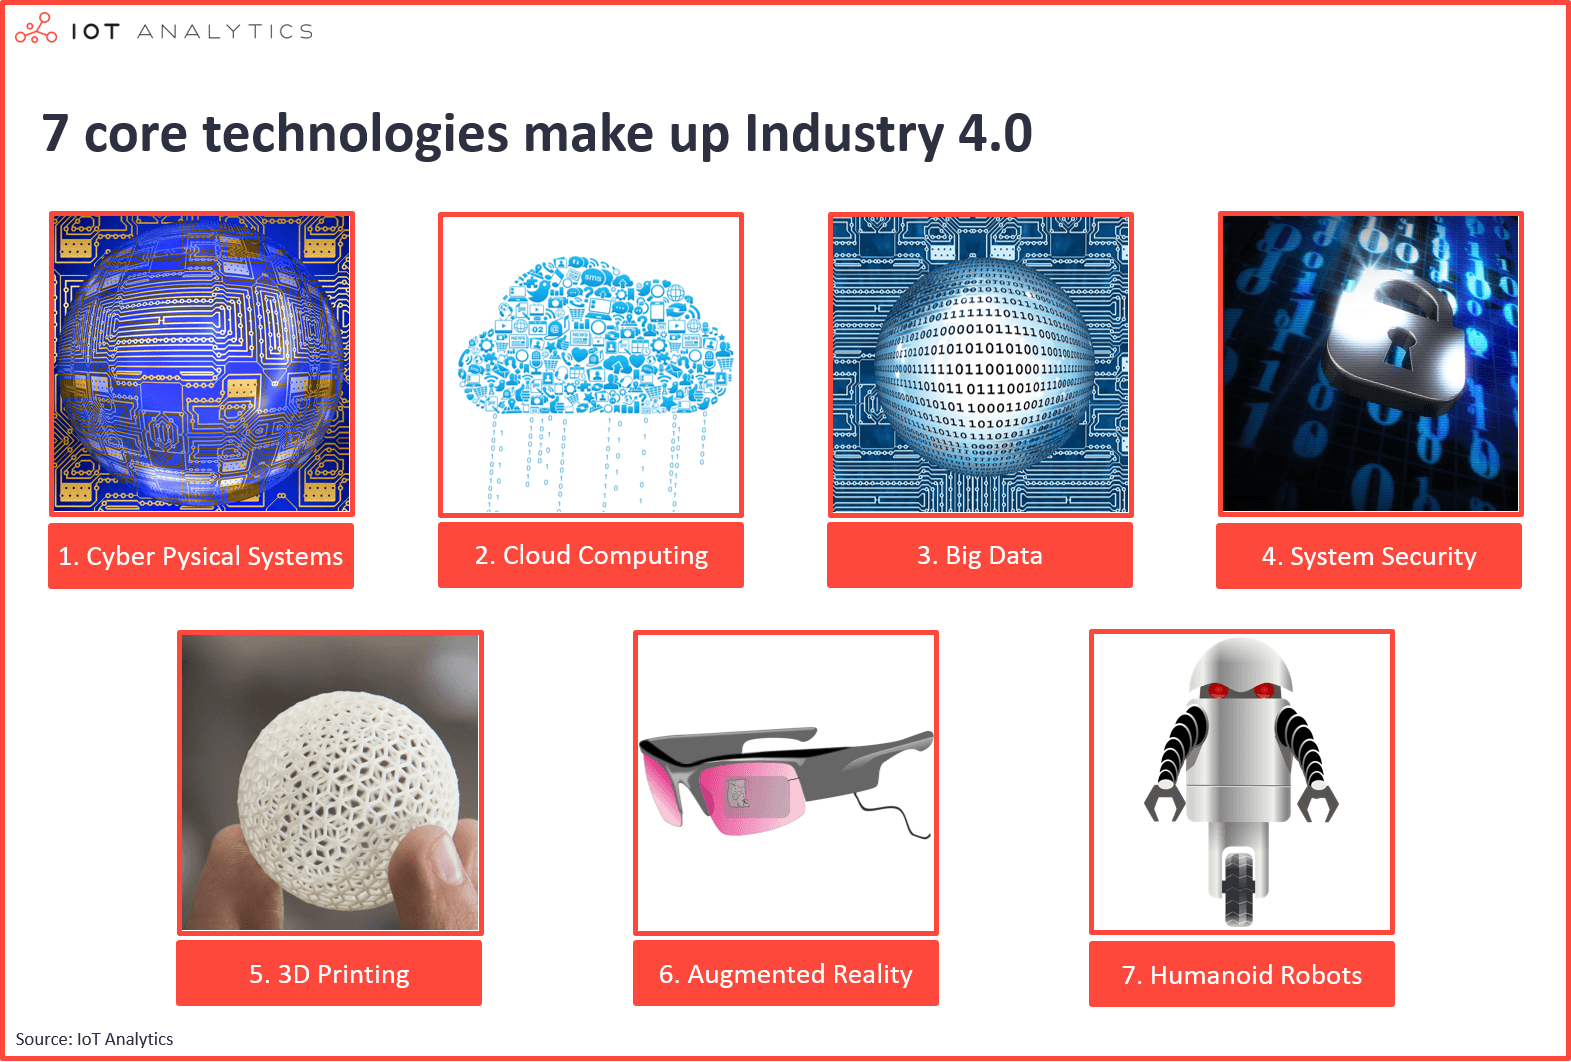 7 industrial technologies making up Industry 4.0